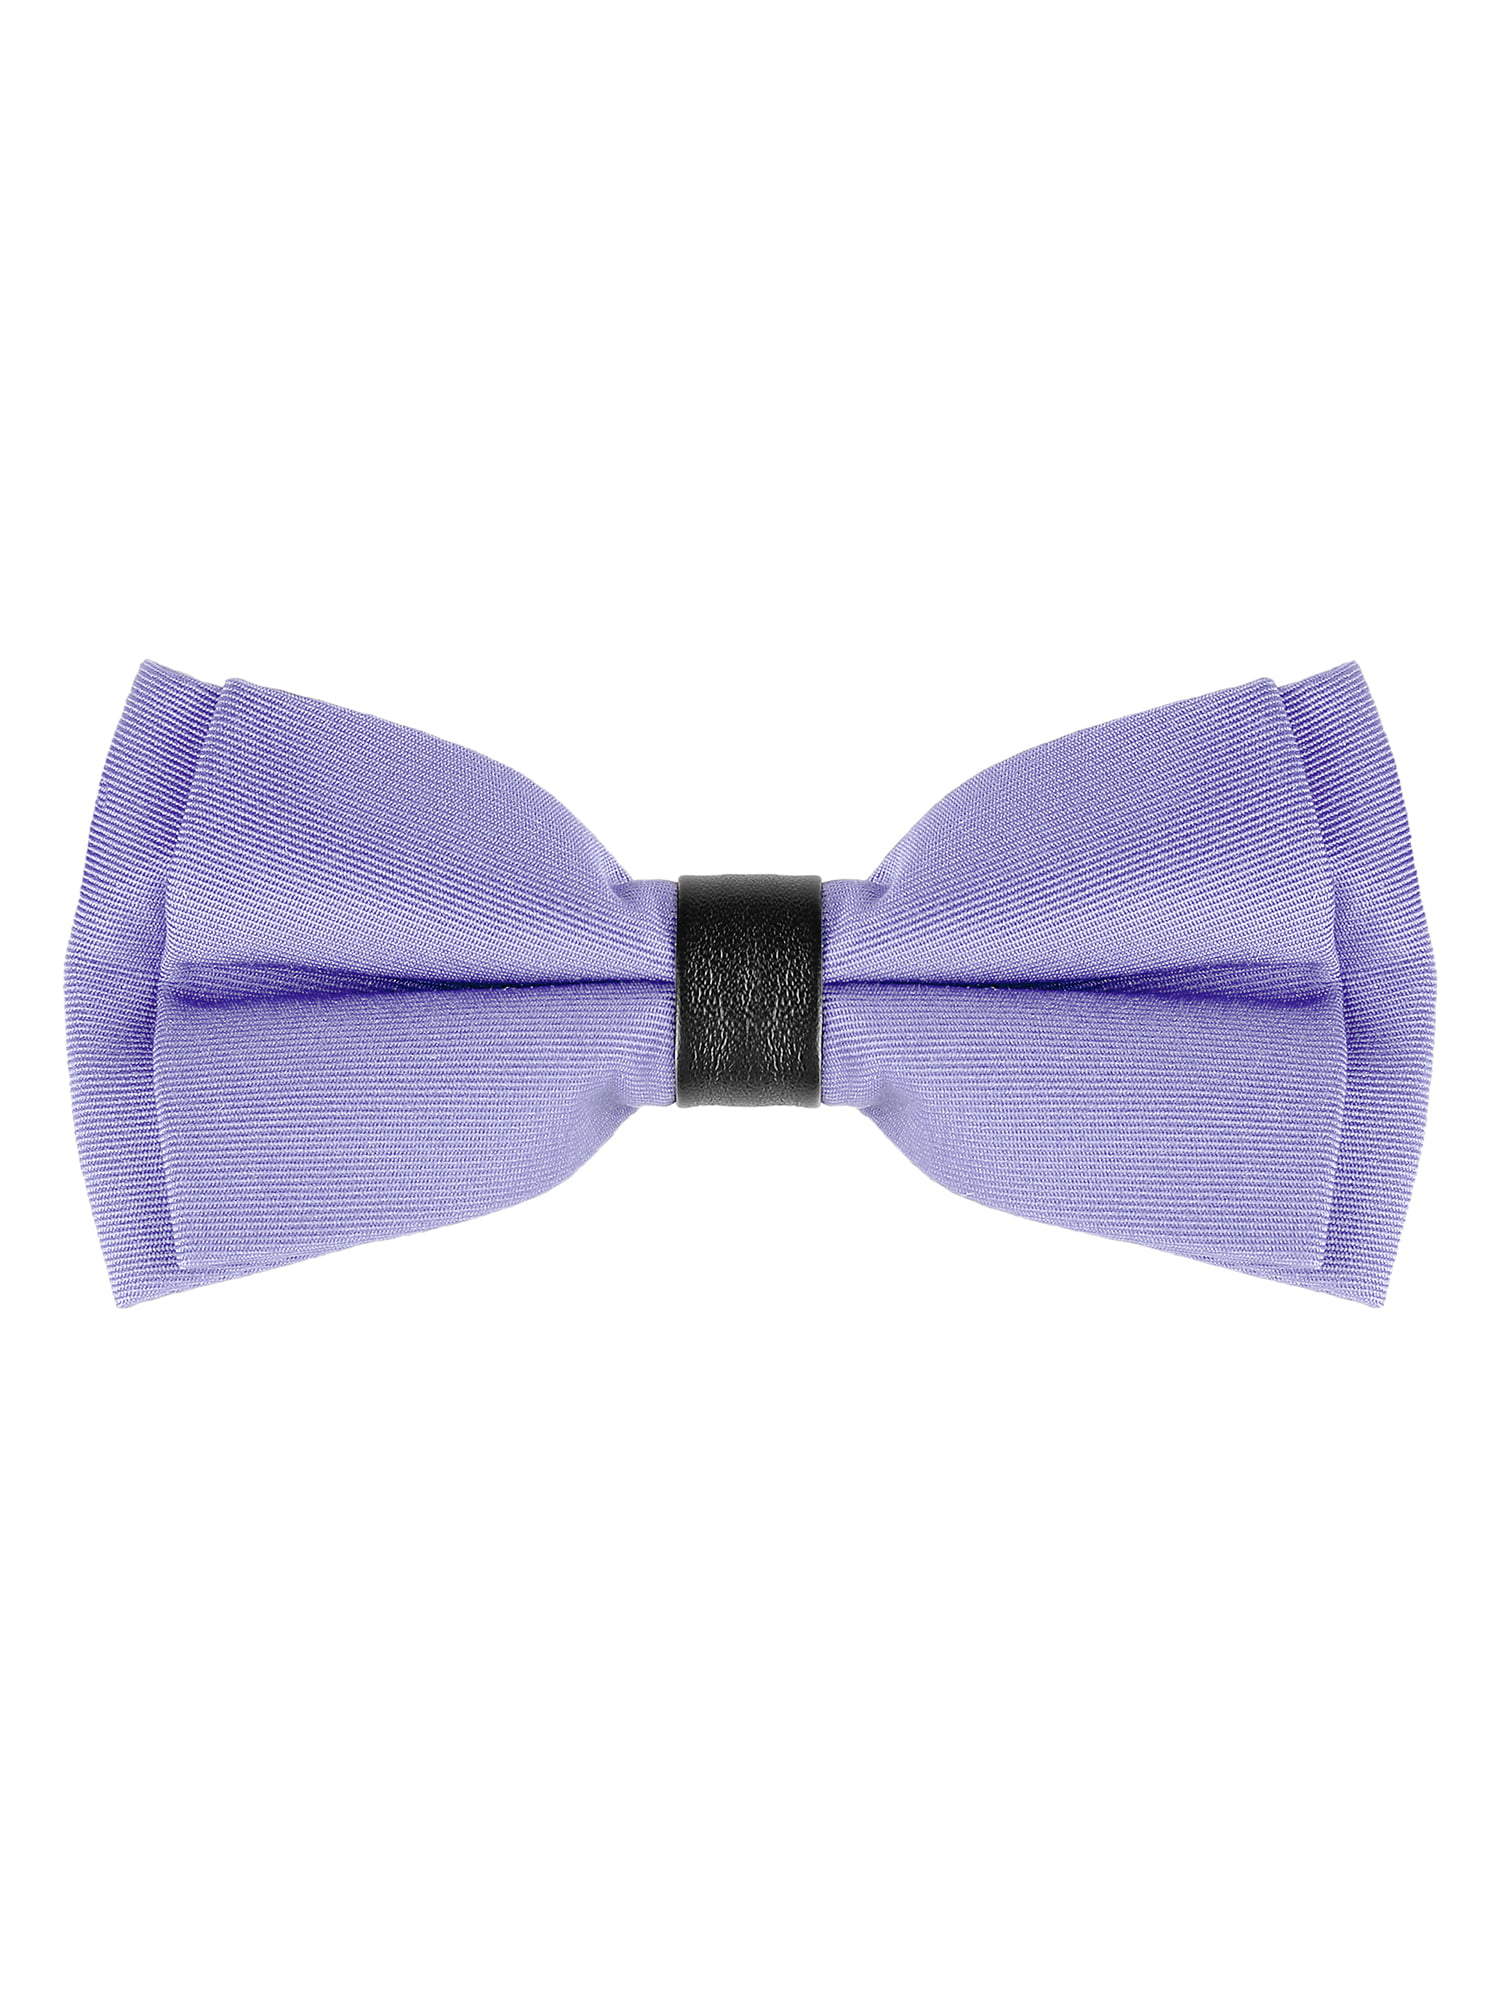 New in box men's self tied bowtie set solid 100% polyester formal lavender 